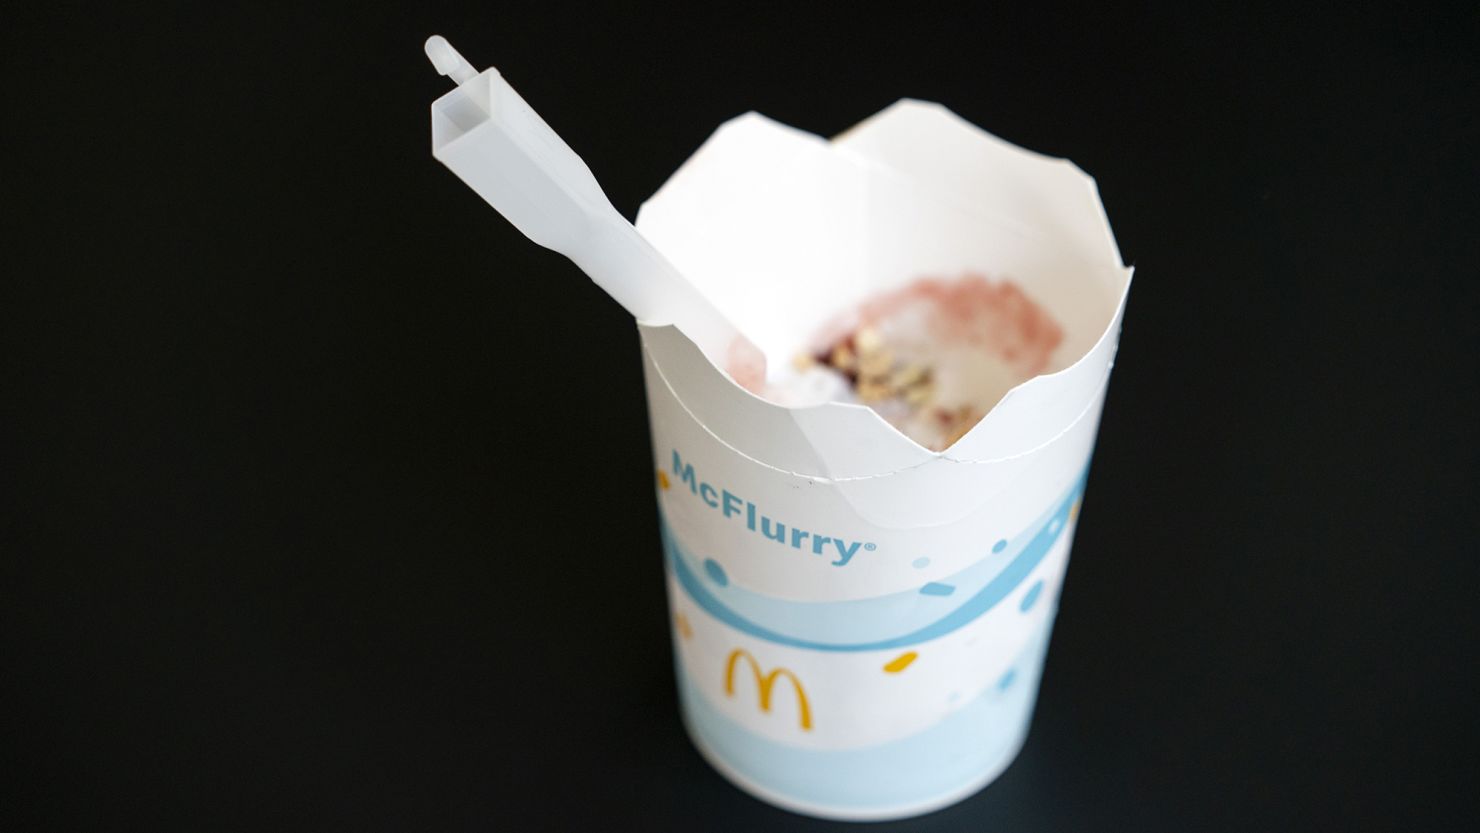 McDonald's is phasing out McFlurry spoons.